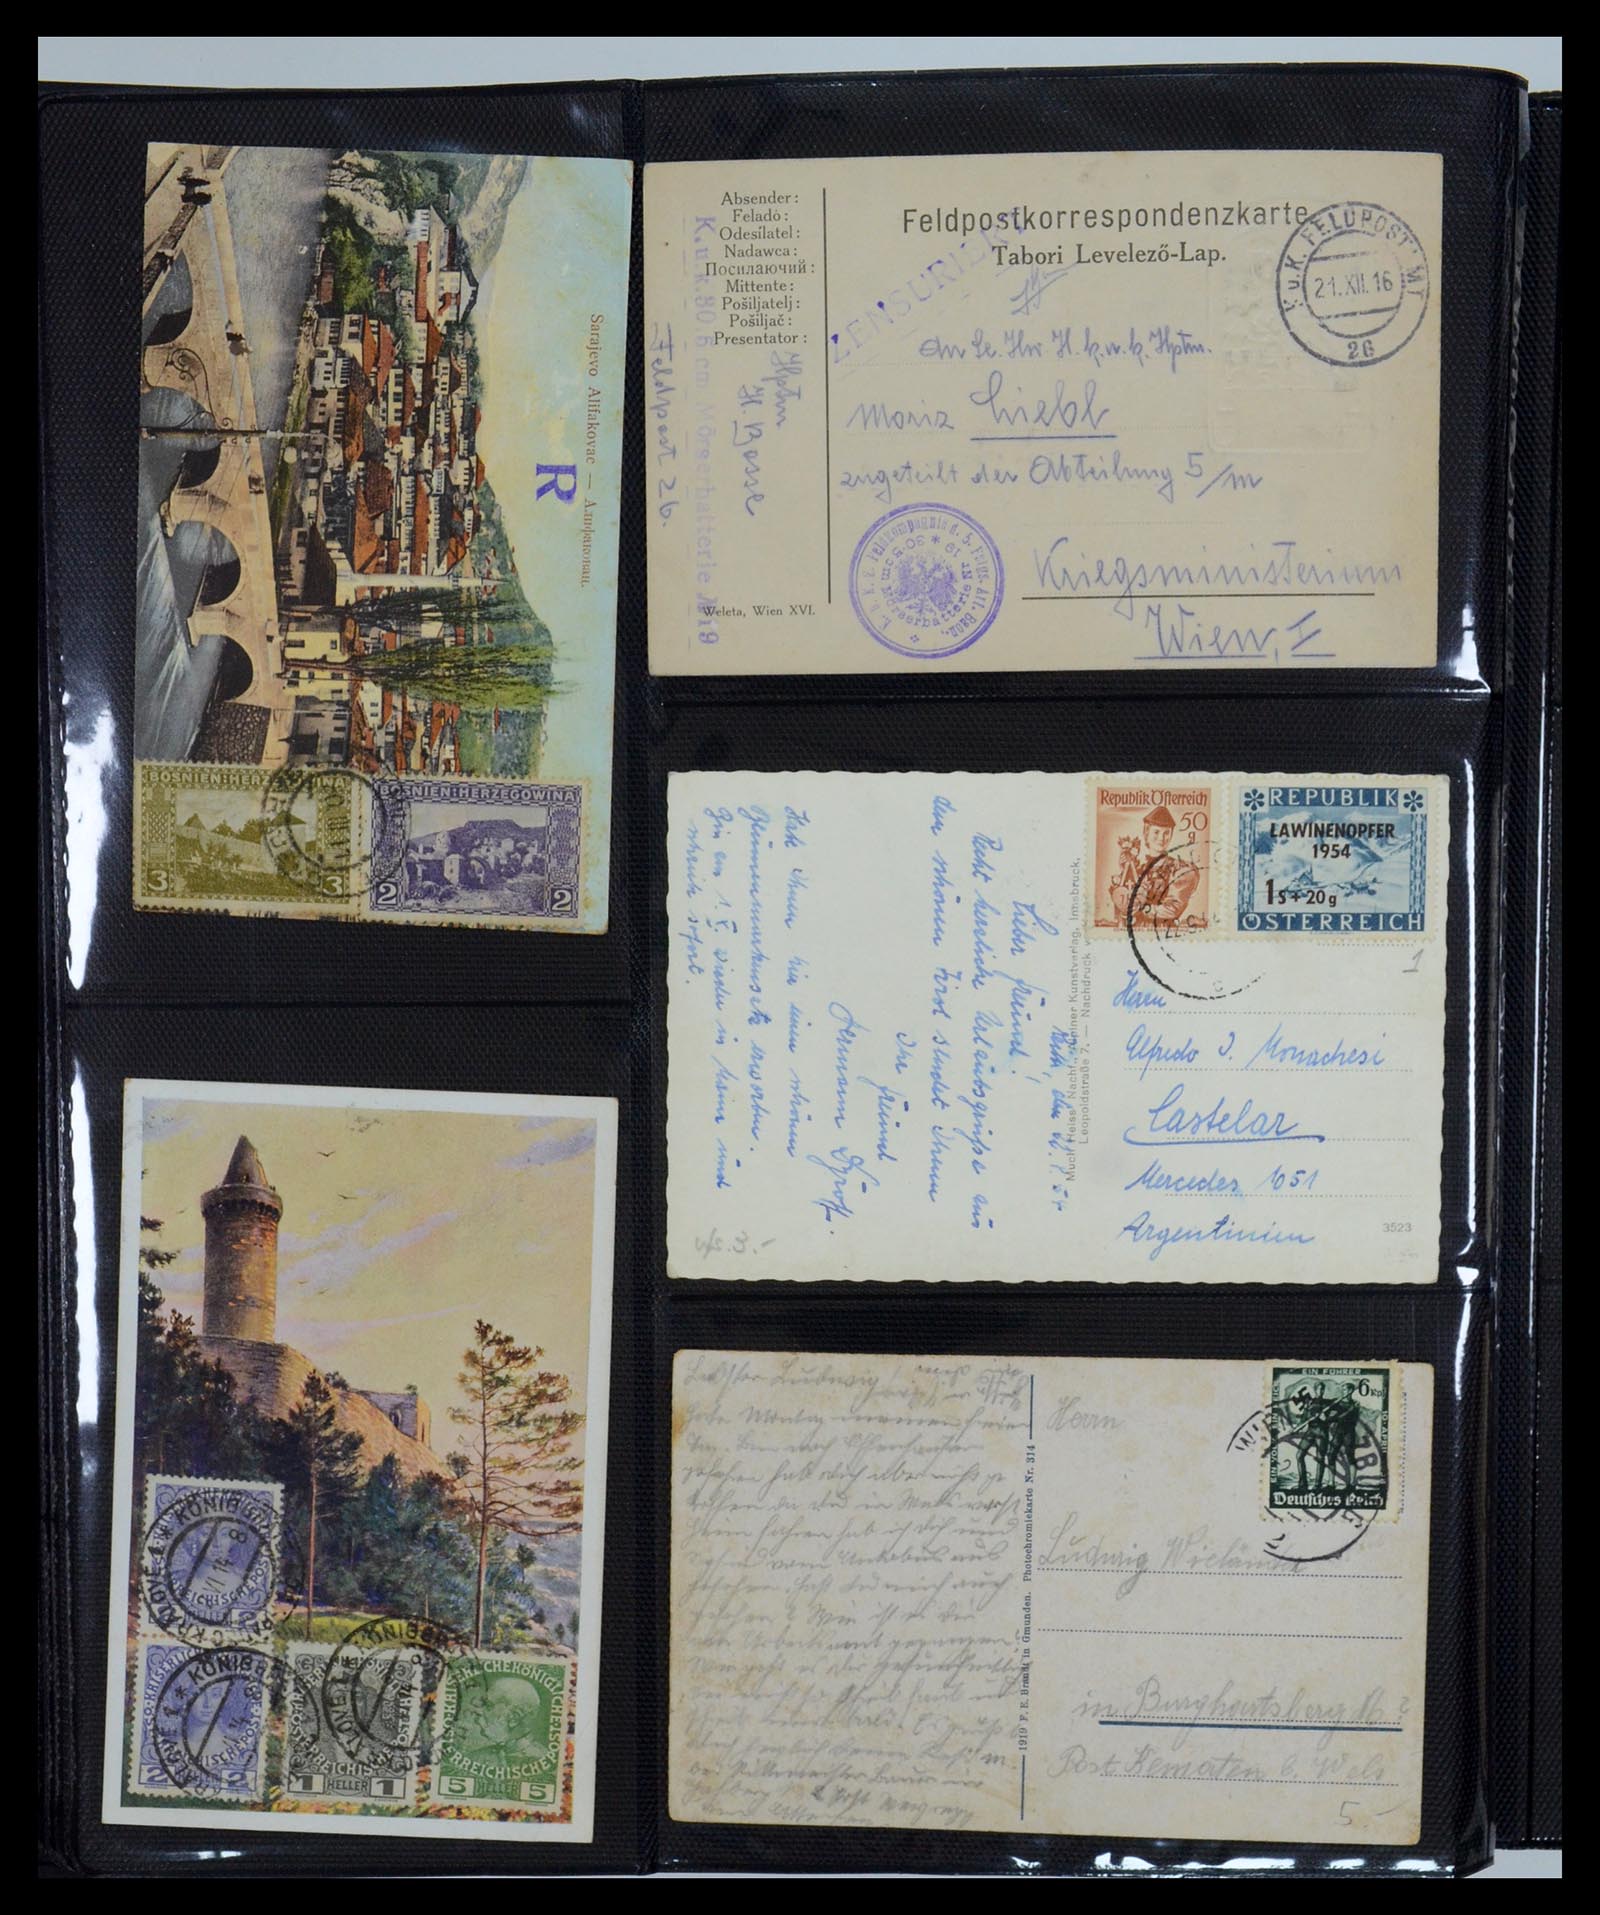 35322 066 - Stamp Collection 35322 Western Europe picture postcards 1900-1945.